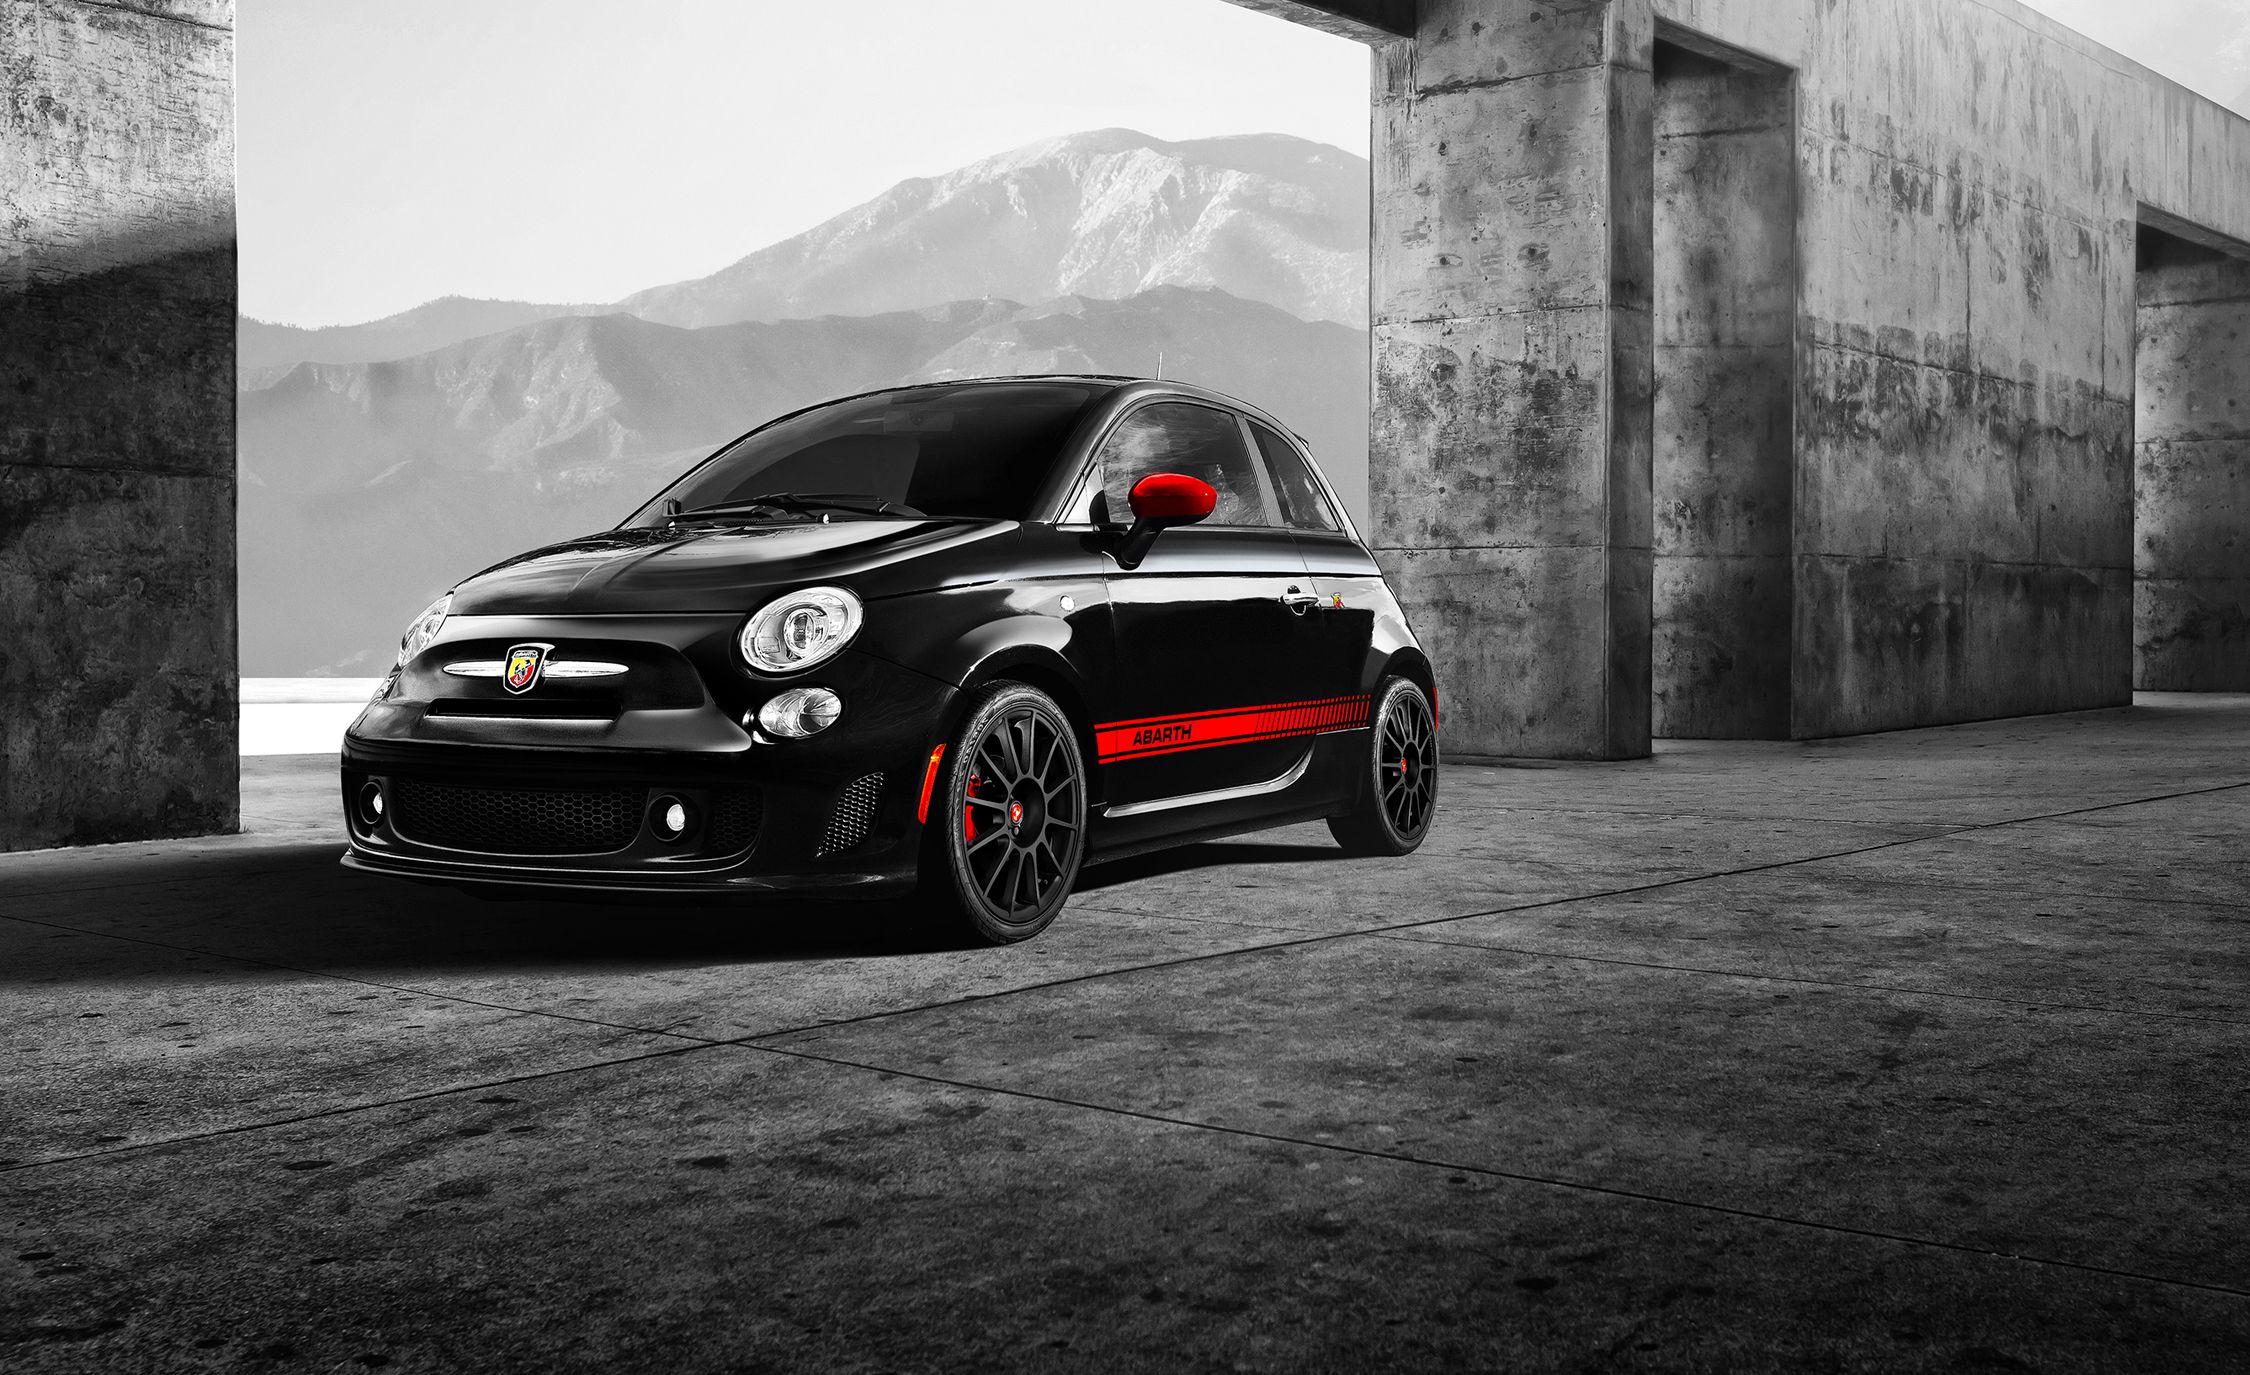 Leeds dek Vacature 2019 Fiat 500 Abarth Review, Pricing, and Specs